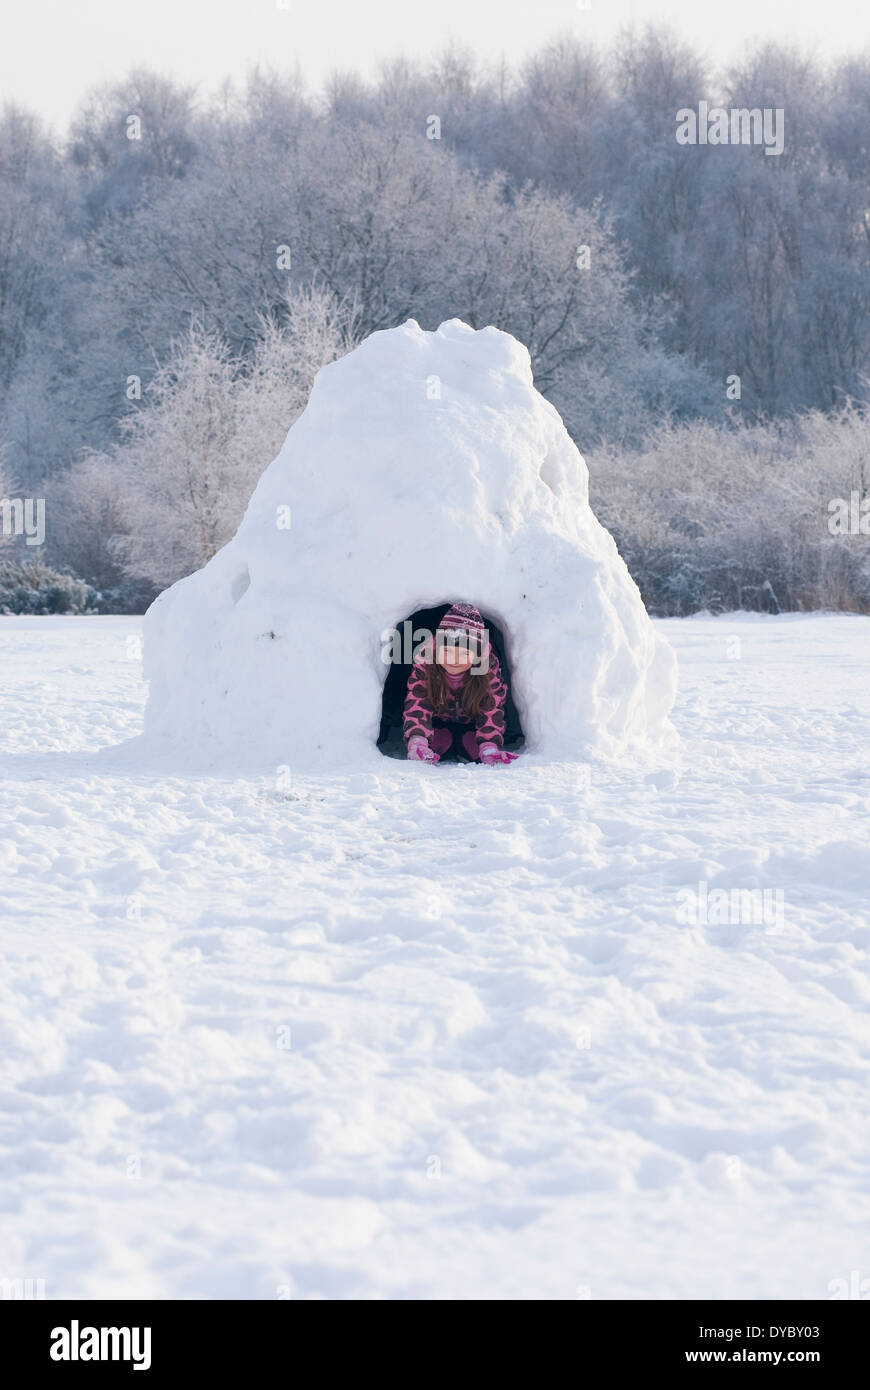 Igloo. Children playing in the snow in an Igloo. Stock Photo